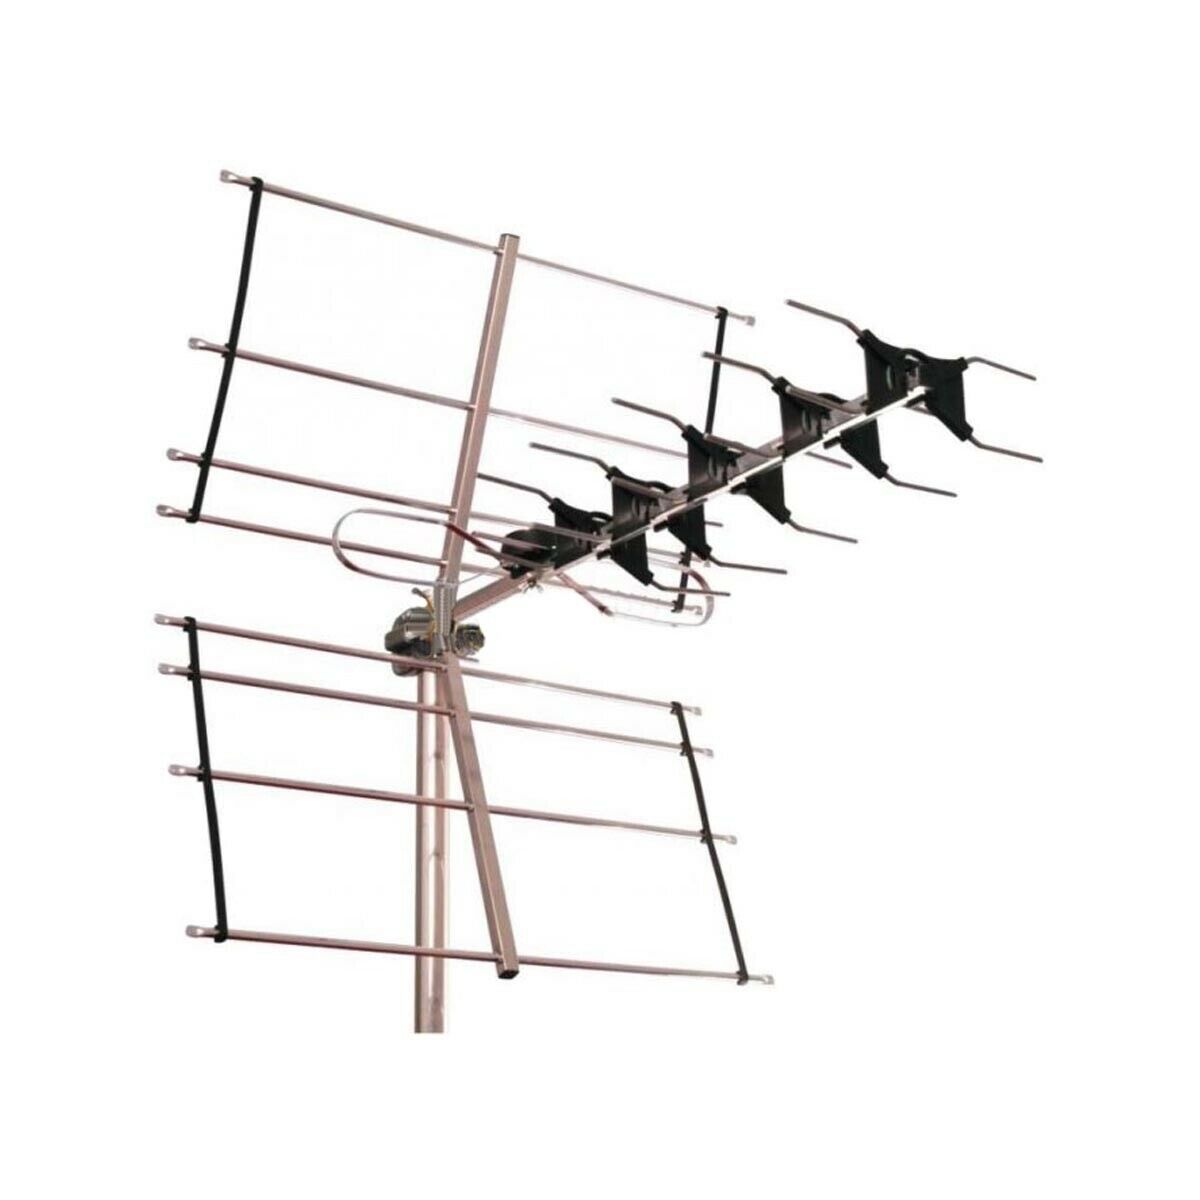 Image shows a front angled view of the Saorview UHF TV Aerial Kit 